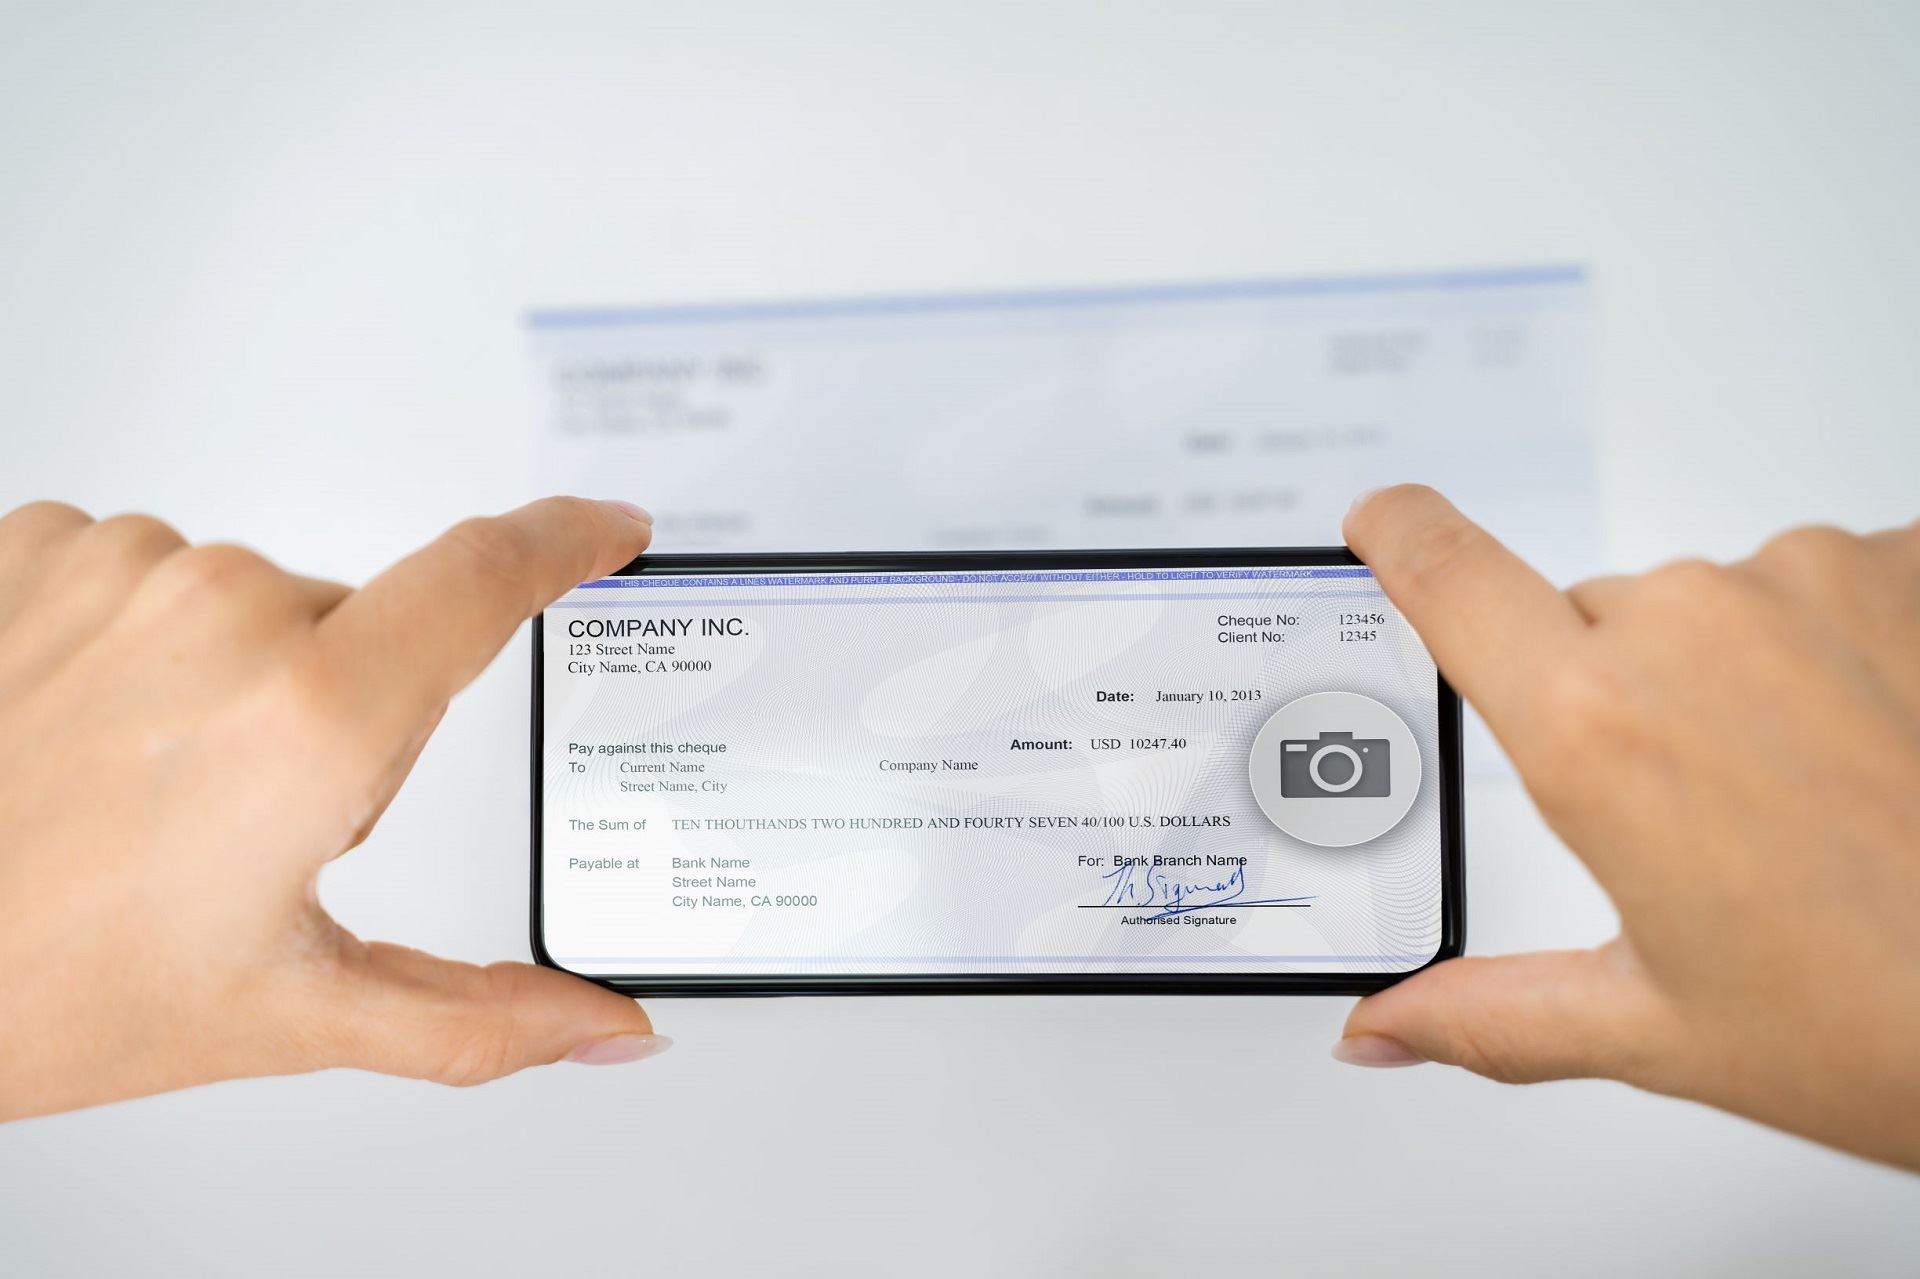 Hands holding a cell phone while taking a picture of a paper check